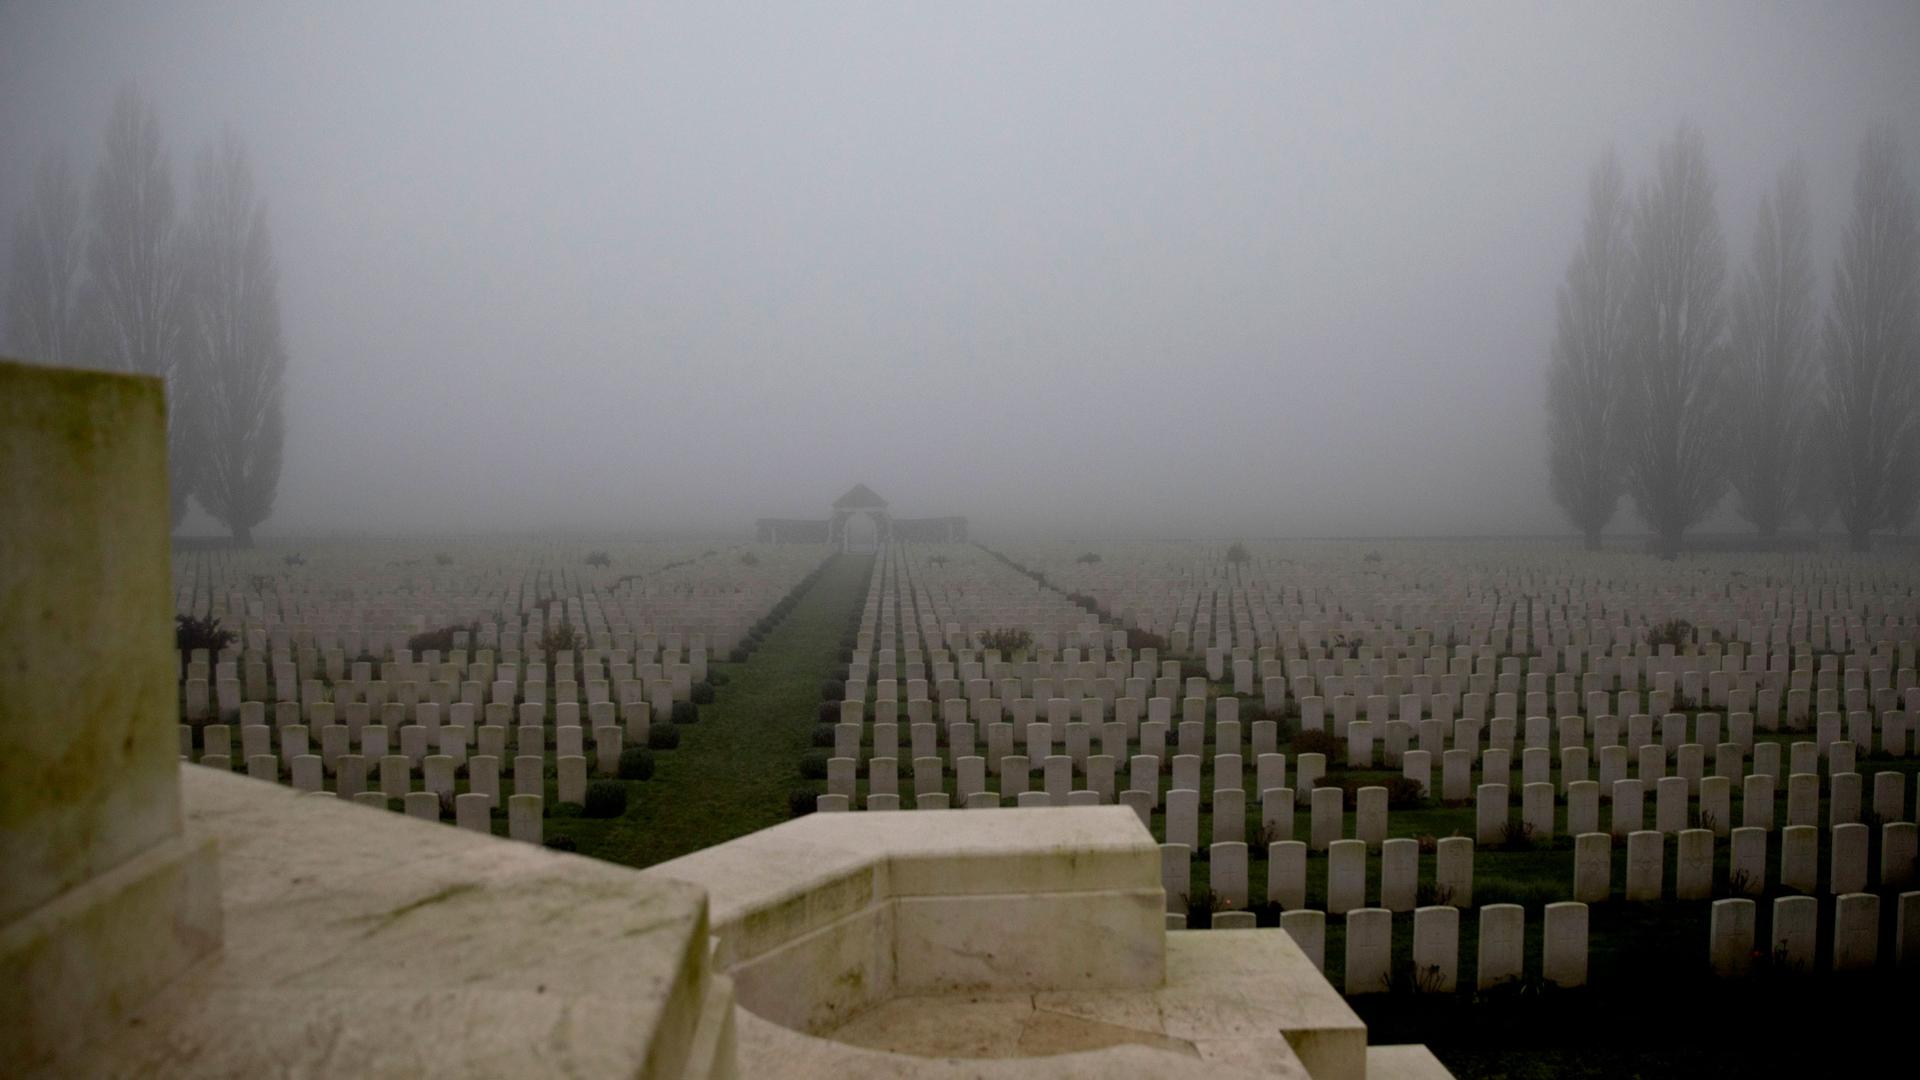 Dozens of rows of headstones are shown in rows at the Tyne Cot cemetery.